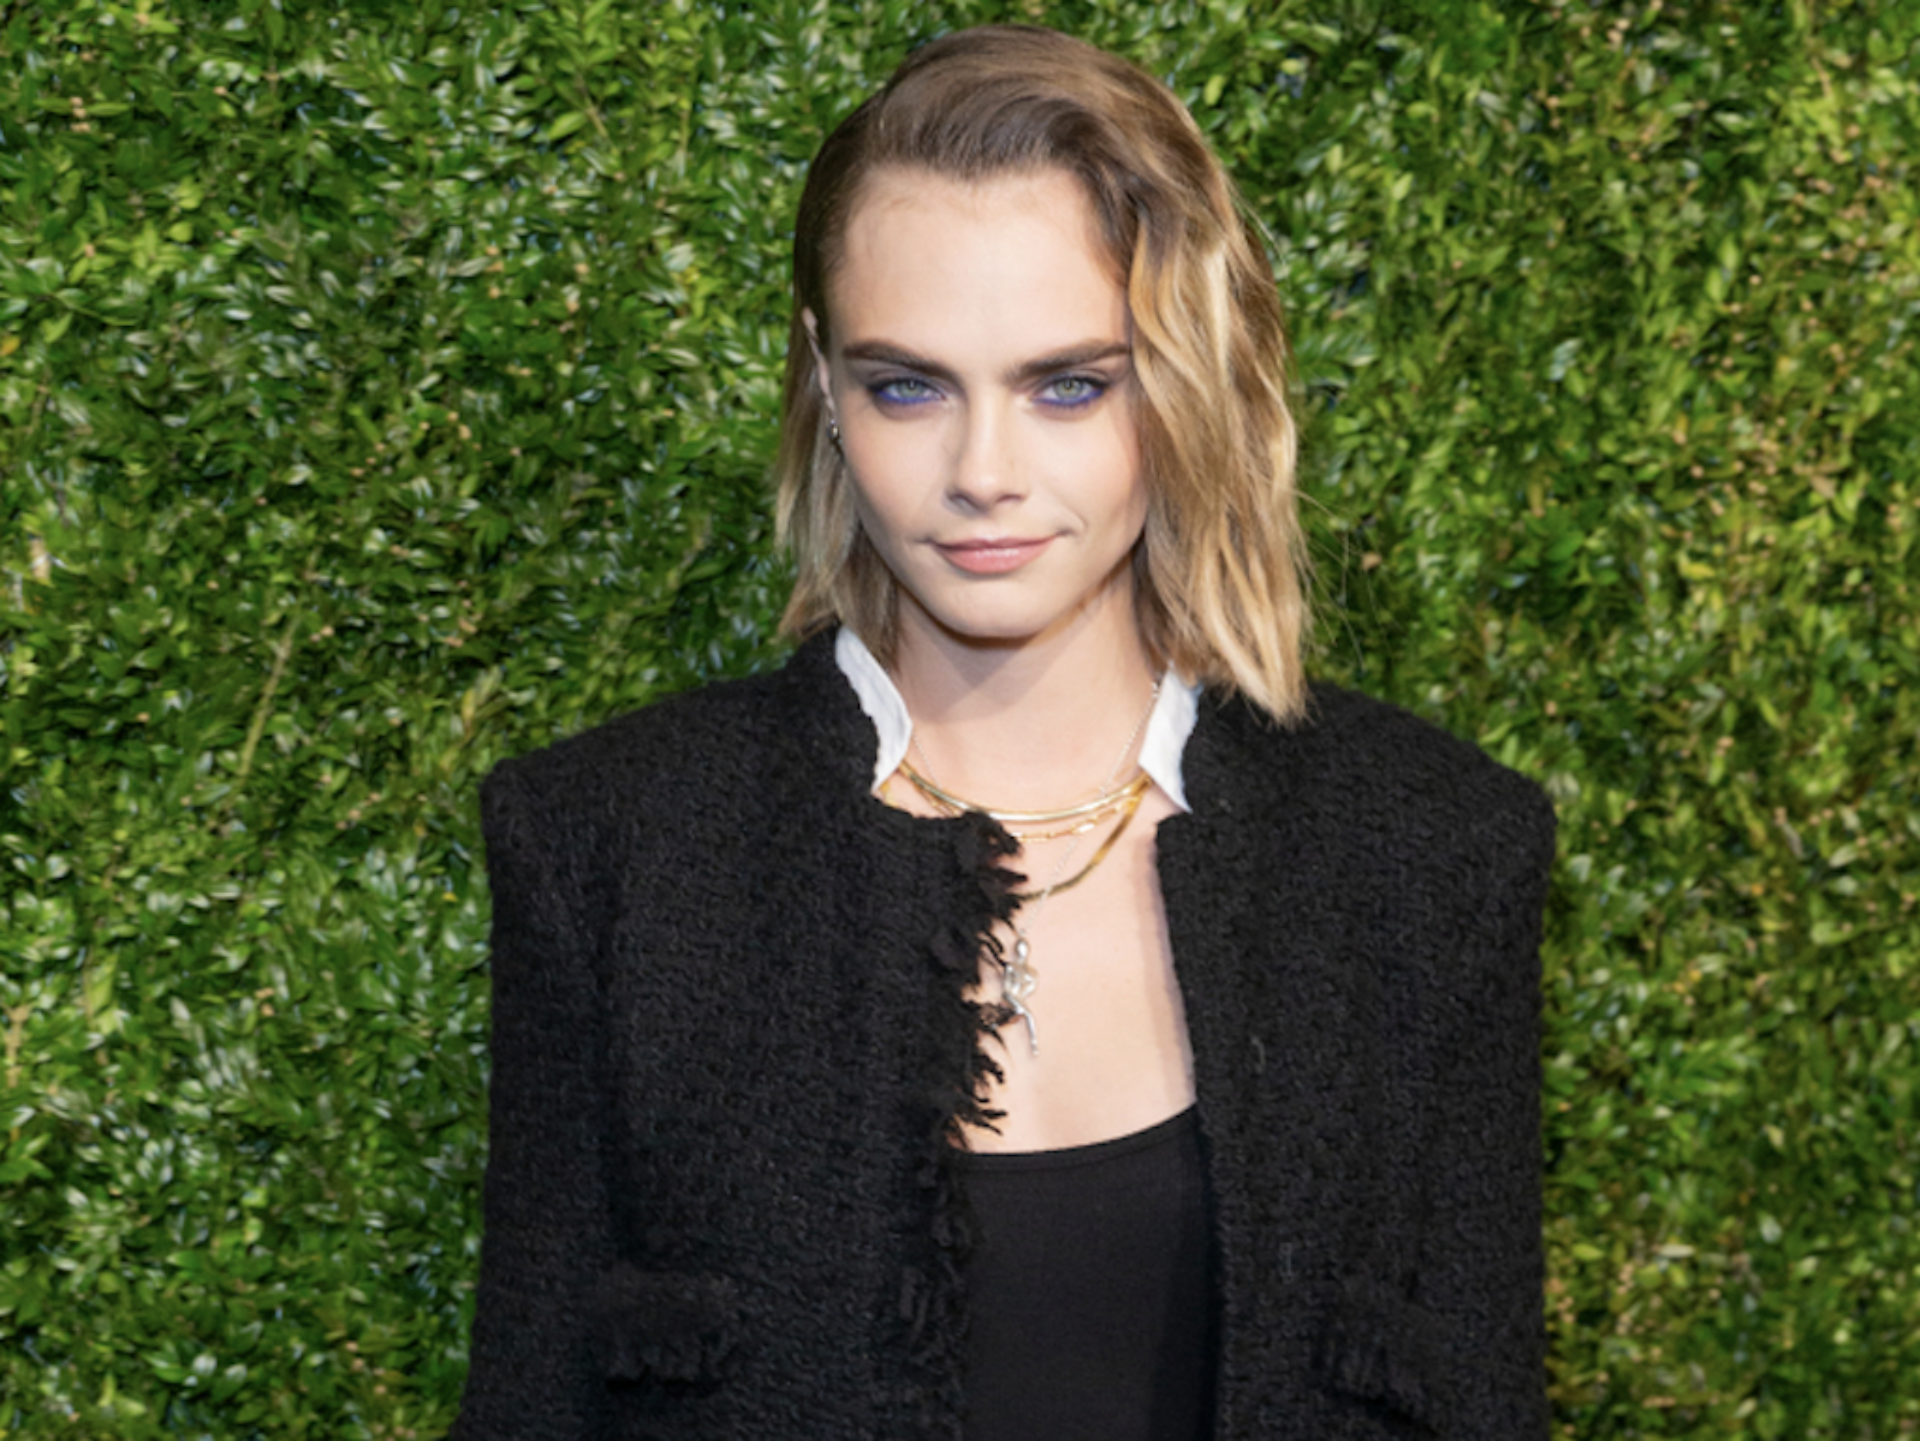 Cara Delevingne's Los Angeles Studio City home burnt down to the ground after being engulfed in flames while she was in London for work.